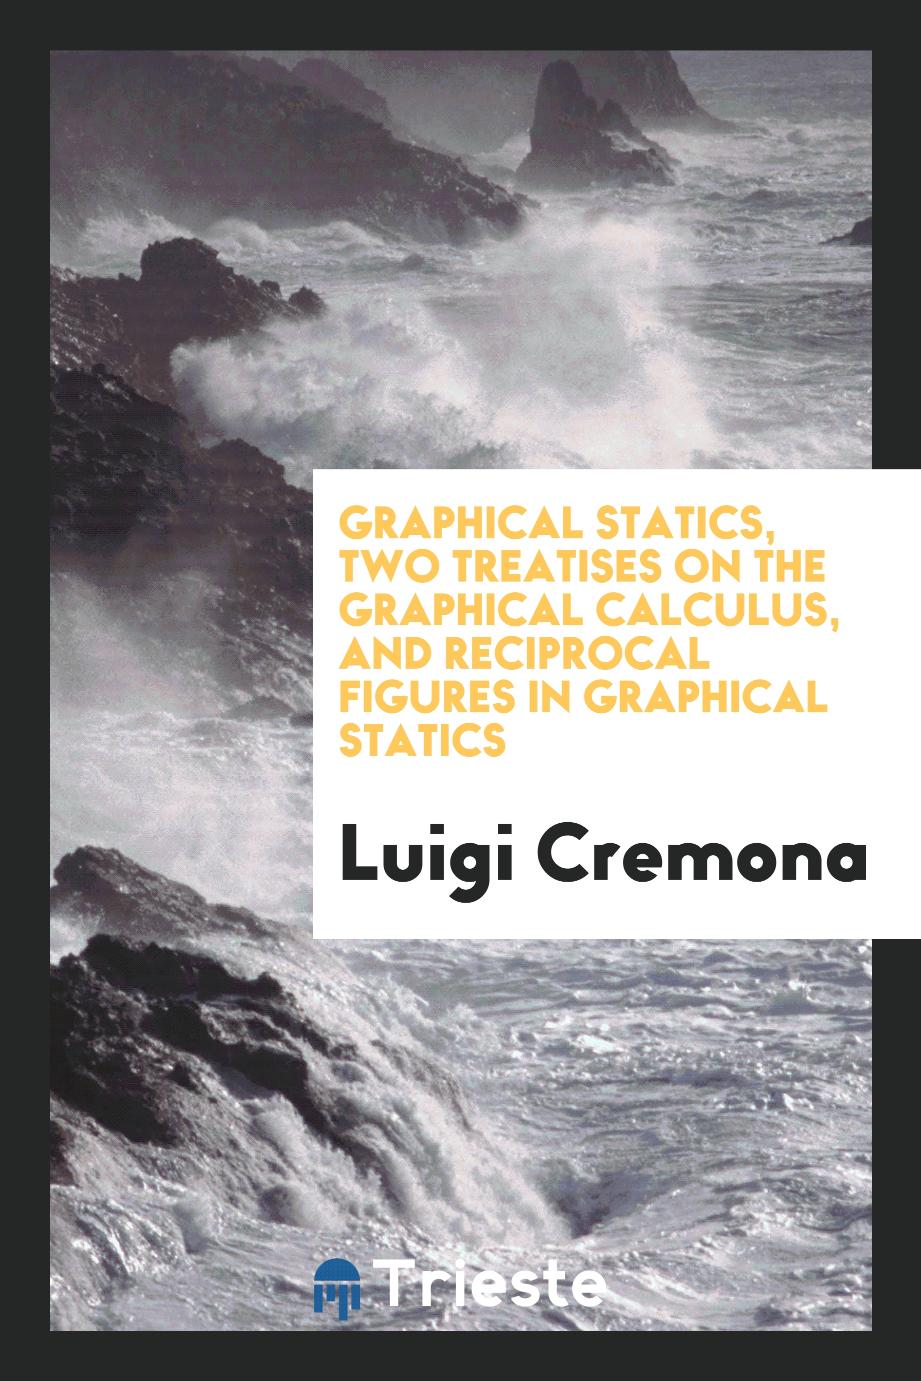 Graphical statics, two treatises on the graphical calculus, and reciprocal figures in graphical statics